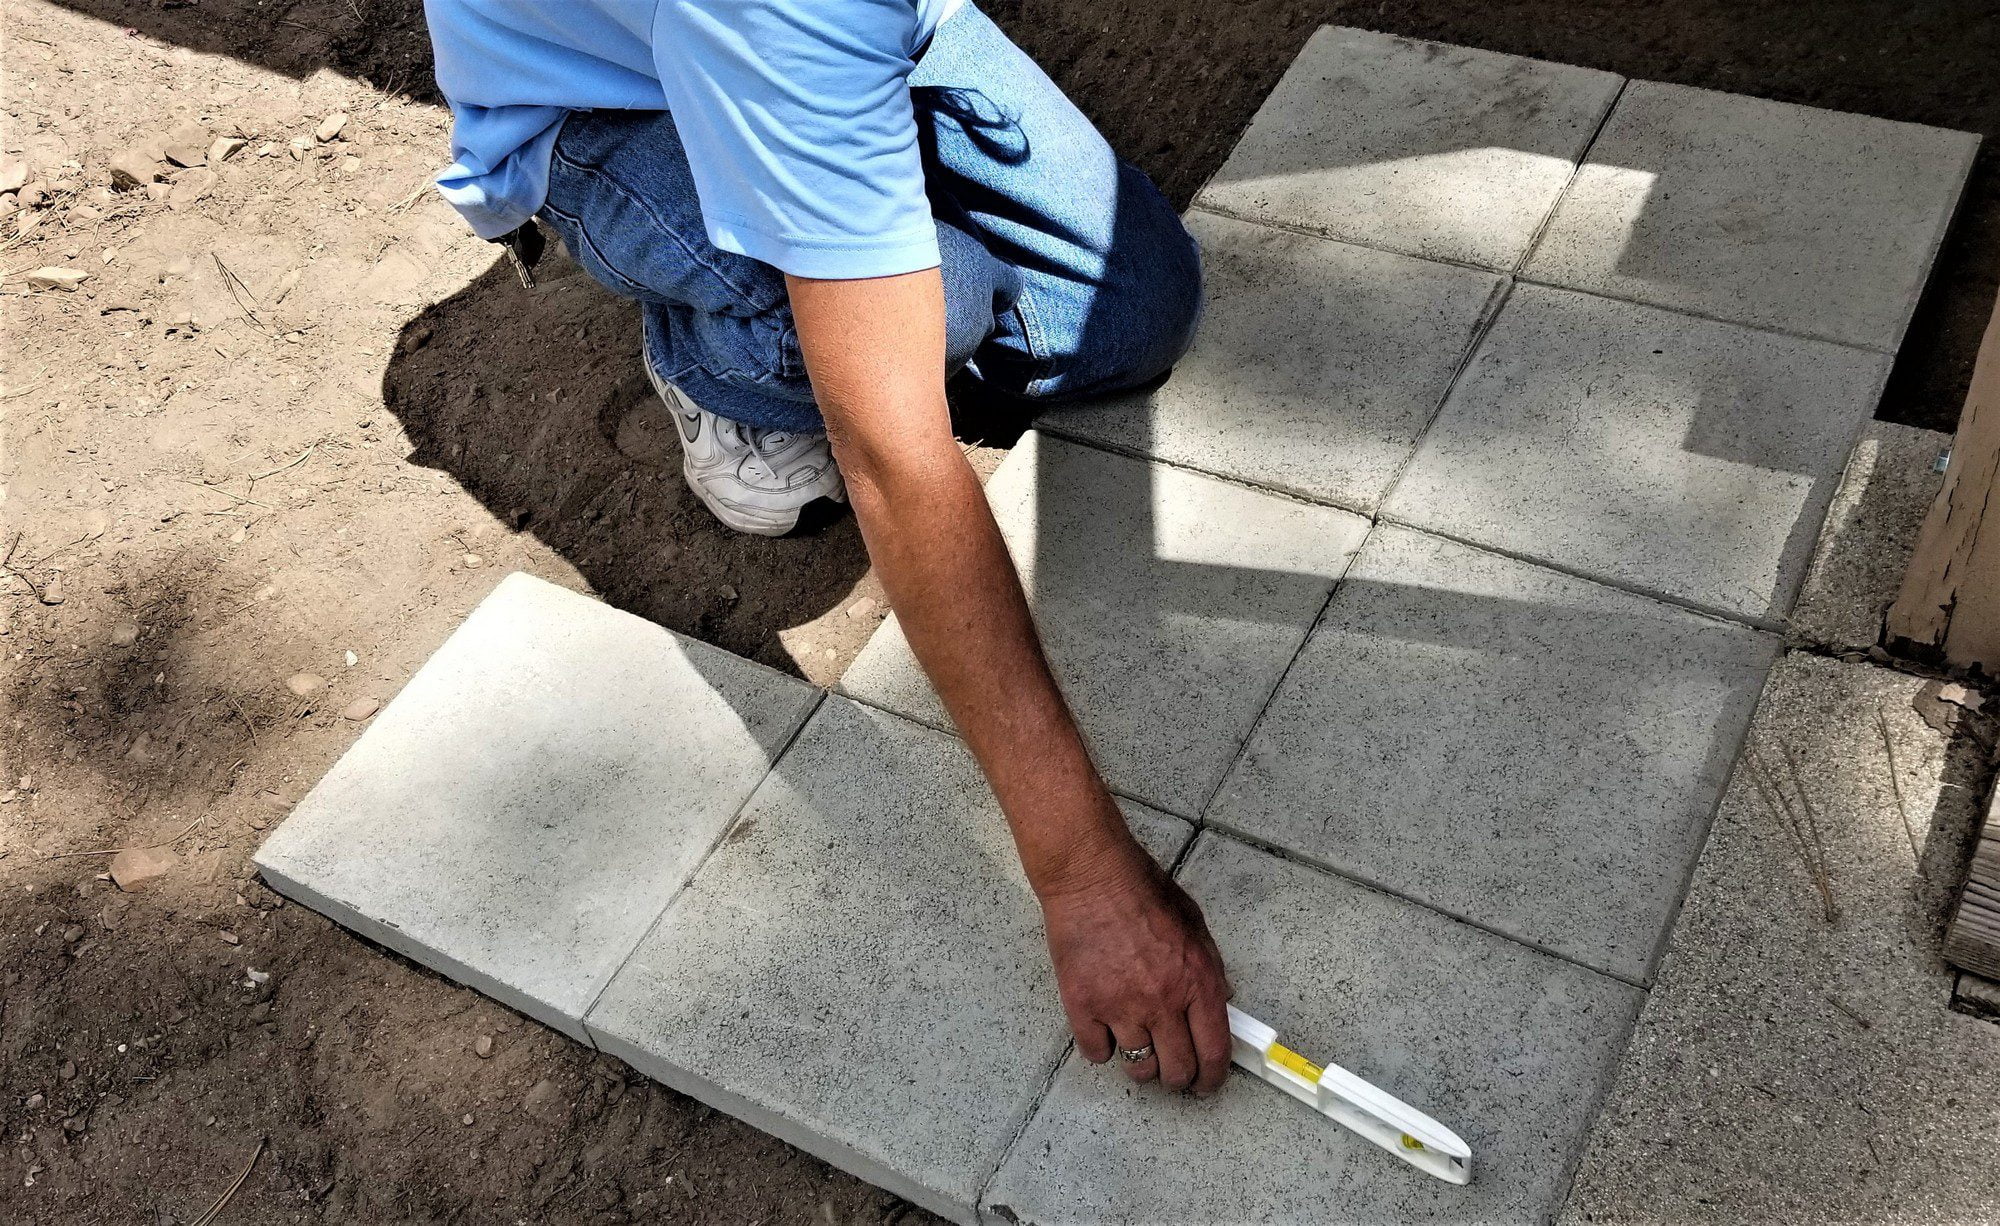 The image shows a close-up of a person engaged in laying or inspecting paving stones or tiles that are being installed outdoors, likely for a patio, walkway, or similar application. The individual is crouched down, with one hand near one of the stones, holding a white object that could be a tool or marker for installation purposes. The stones are light grey and there are shadows cast on them, suggesting it is a bright and sunny day. Around the stones, you can see dirt and an area that has not been paved yet, indicating that the installation or repair work is in progress. The person is wearing a light blue shirt, denim jeans, and white trainers.